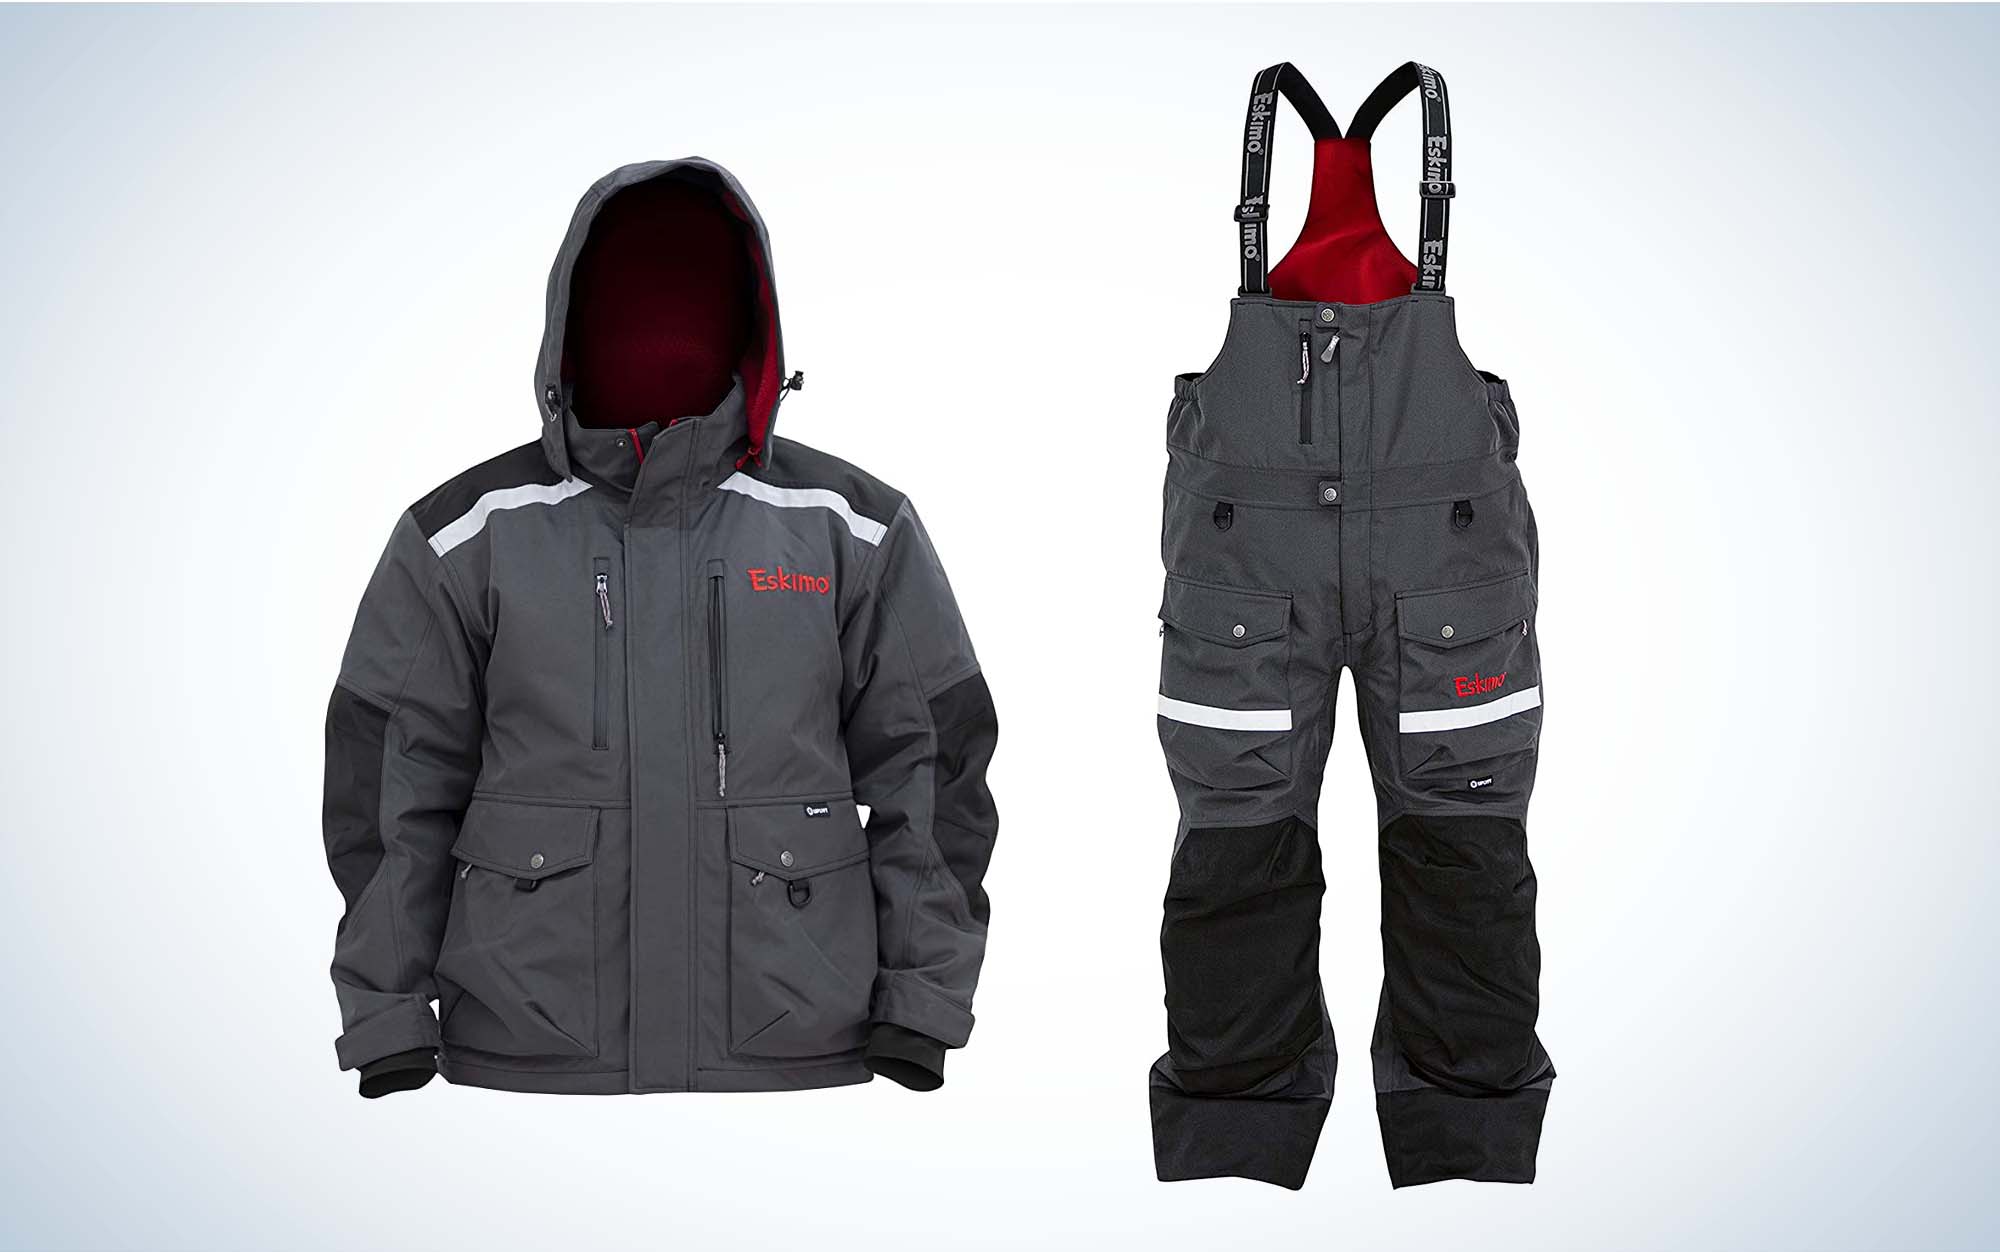 Best Ice Fishing Suits – Why These Suits Are a Must-Have!